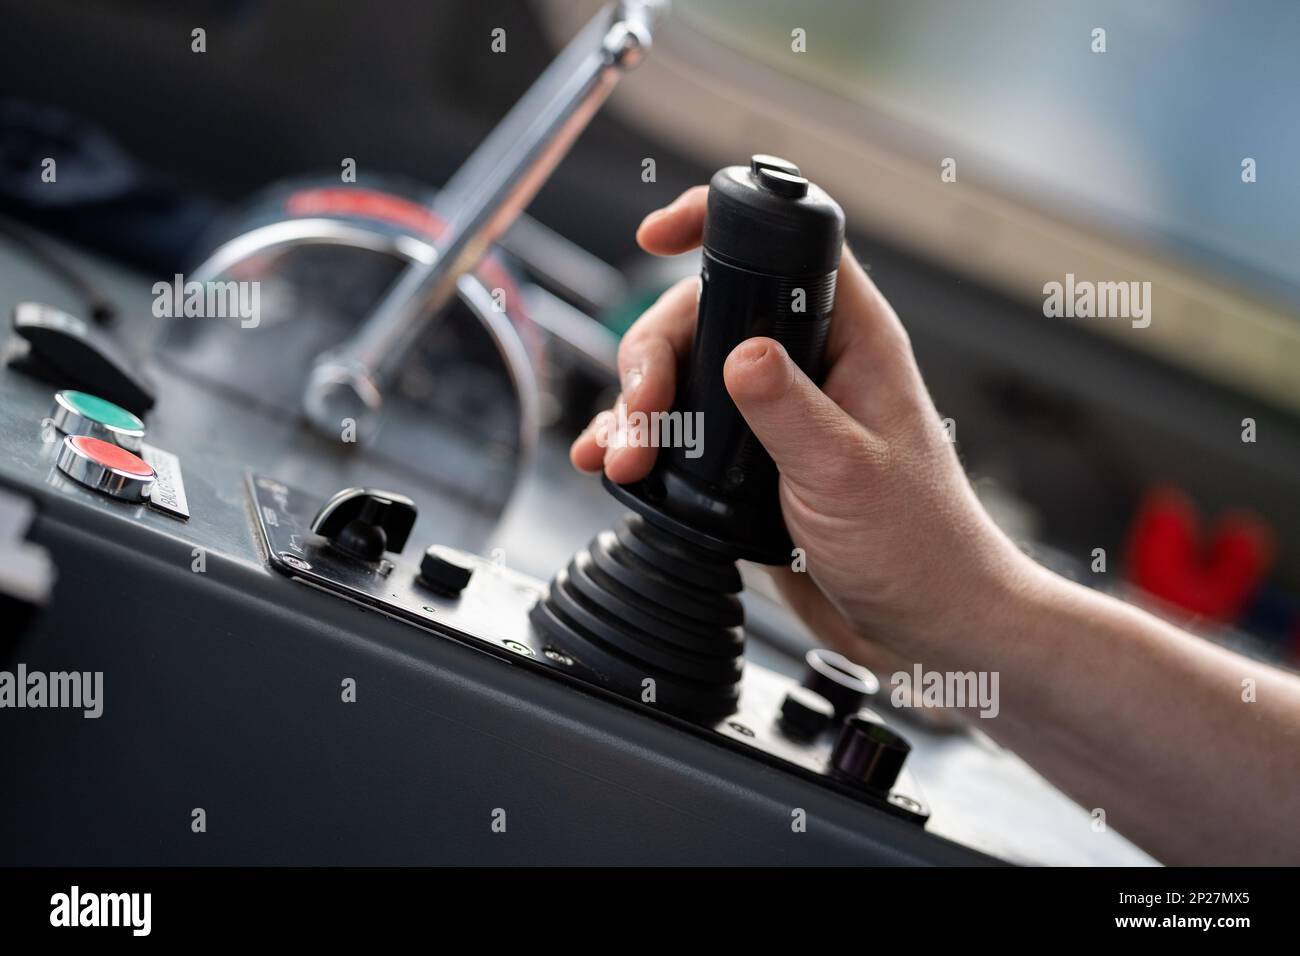 A person with an injured finger holding a remote control device of a boat  Stock Photo - Alamy